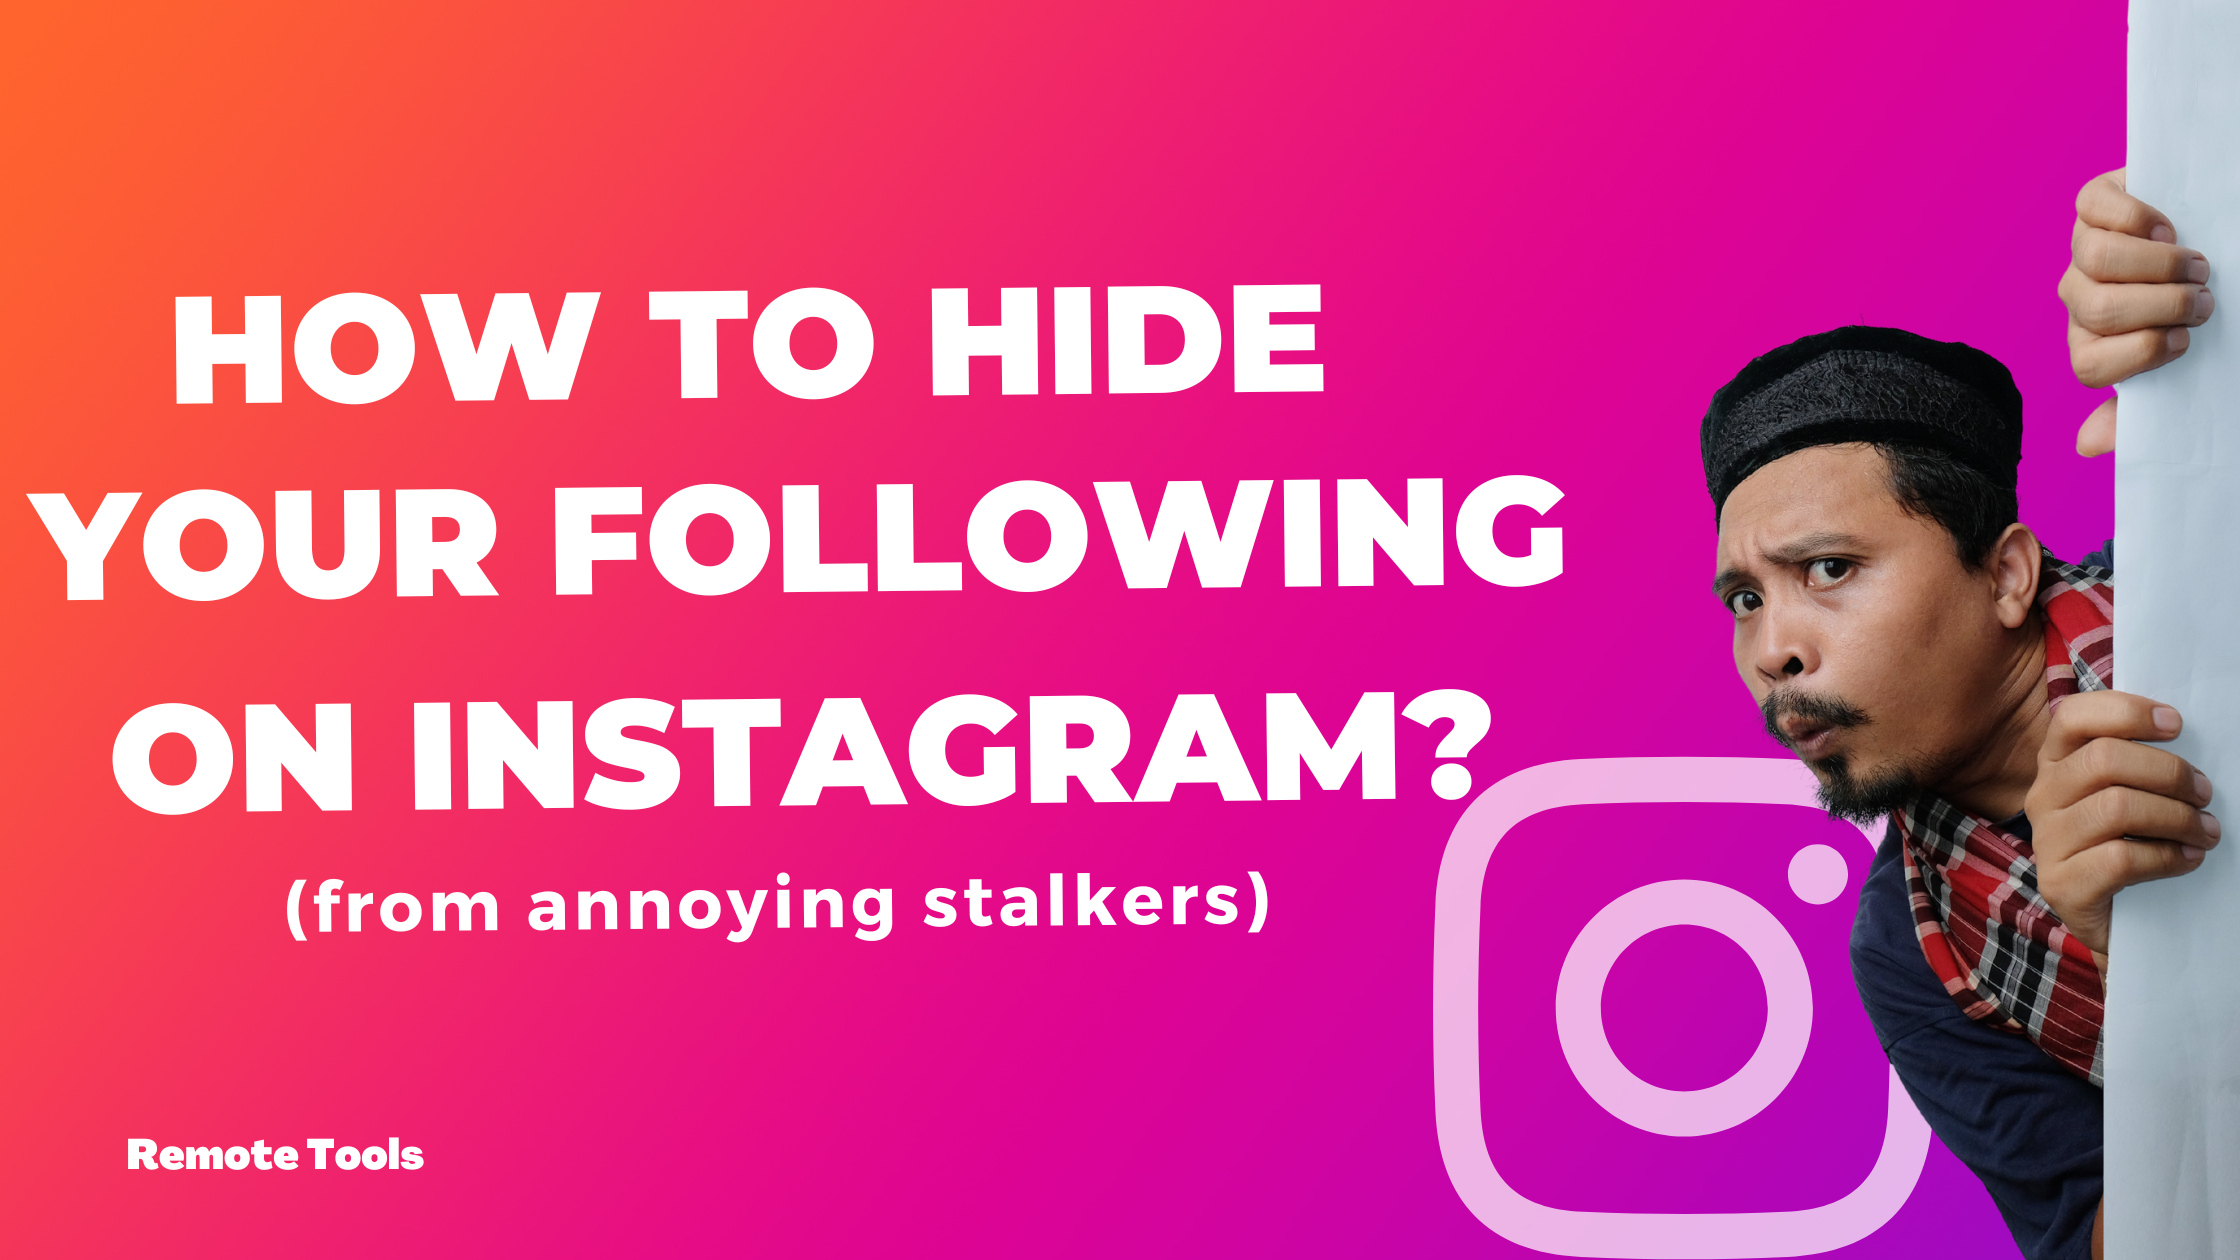 Remote.tools shares how to hide following on Instagram